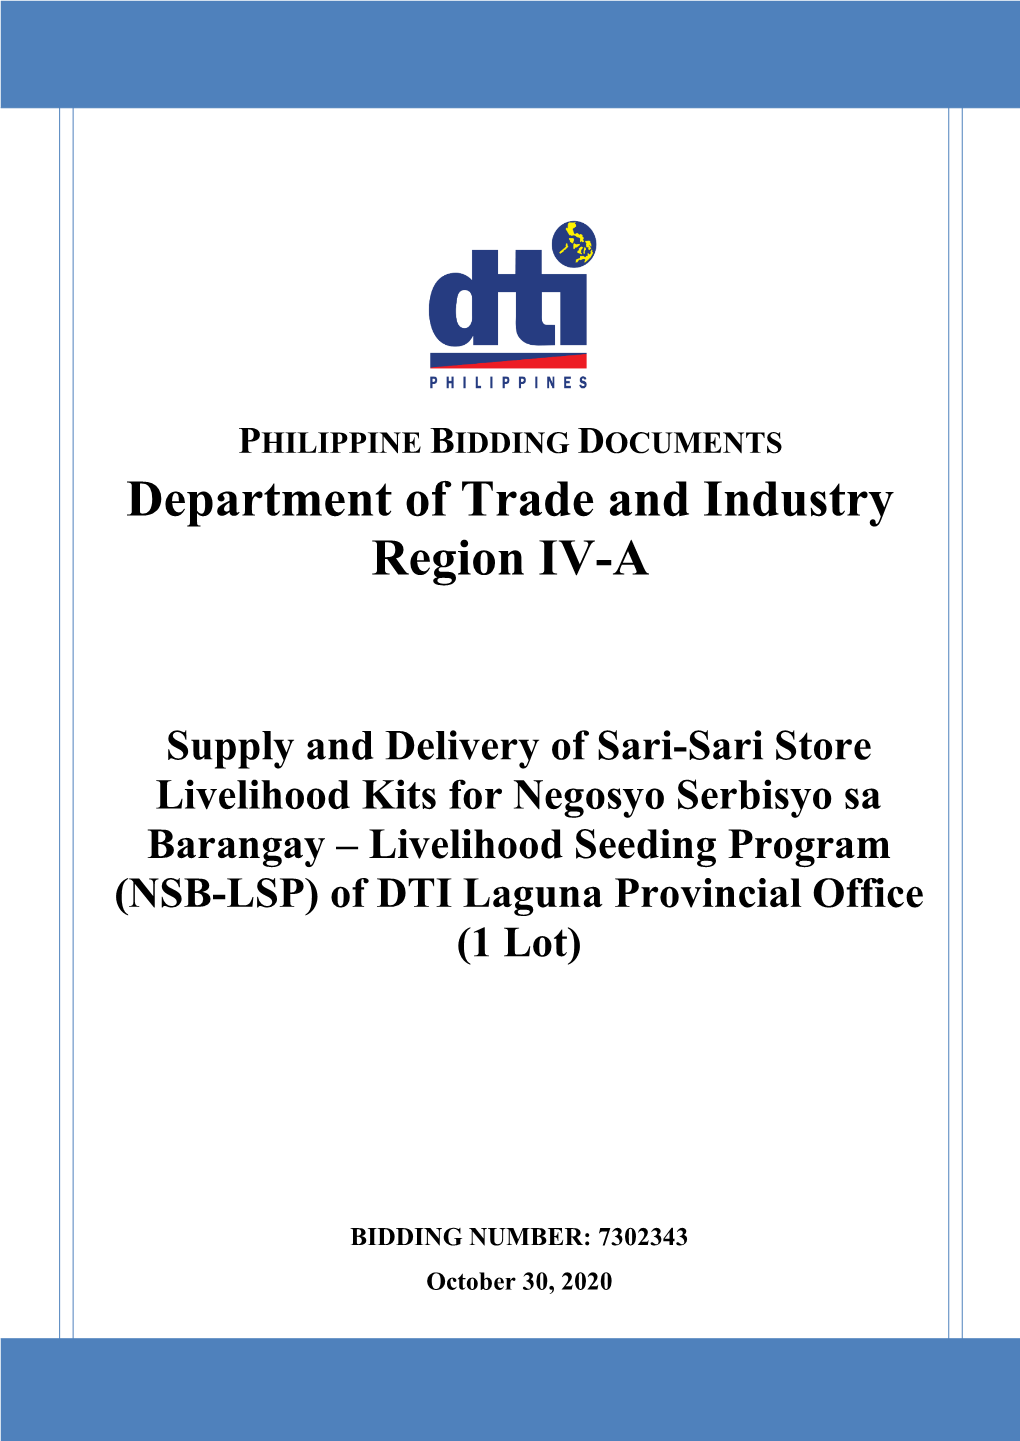 BIDDING DOCUMENTS Department of Trade and Industry Region IV-A